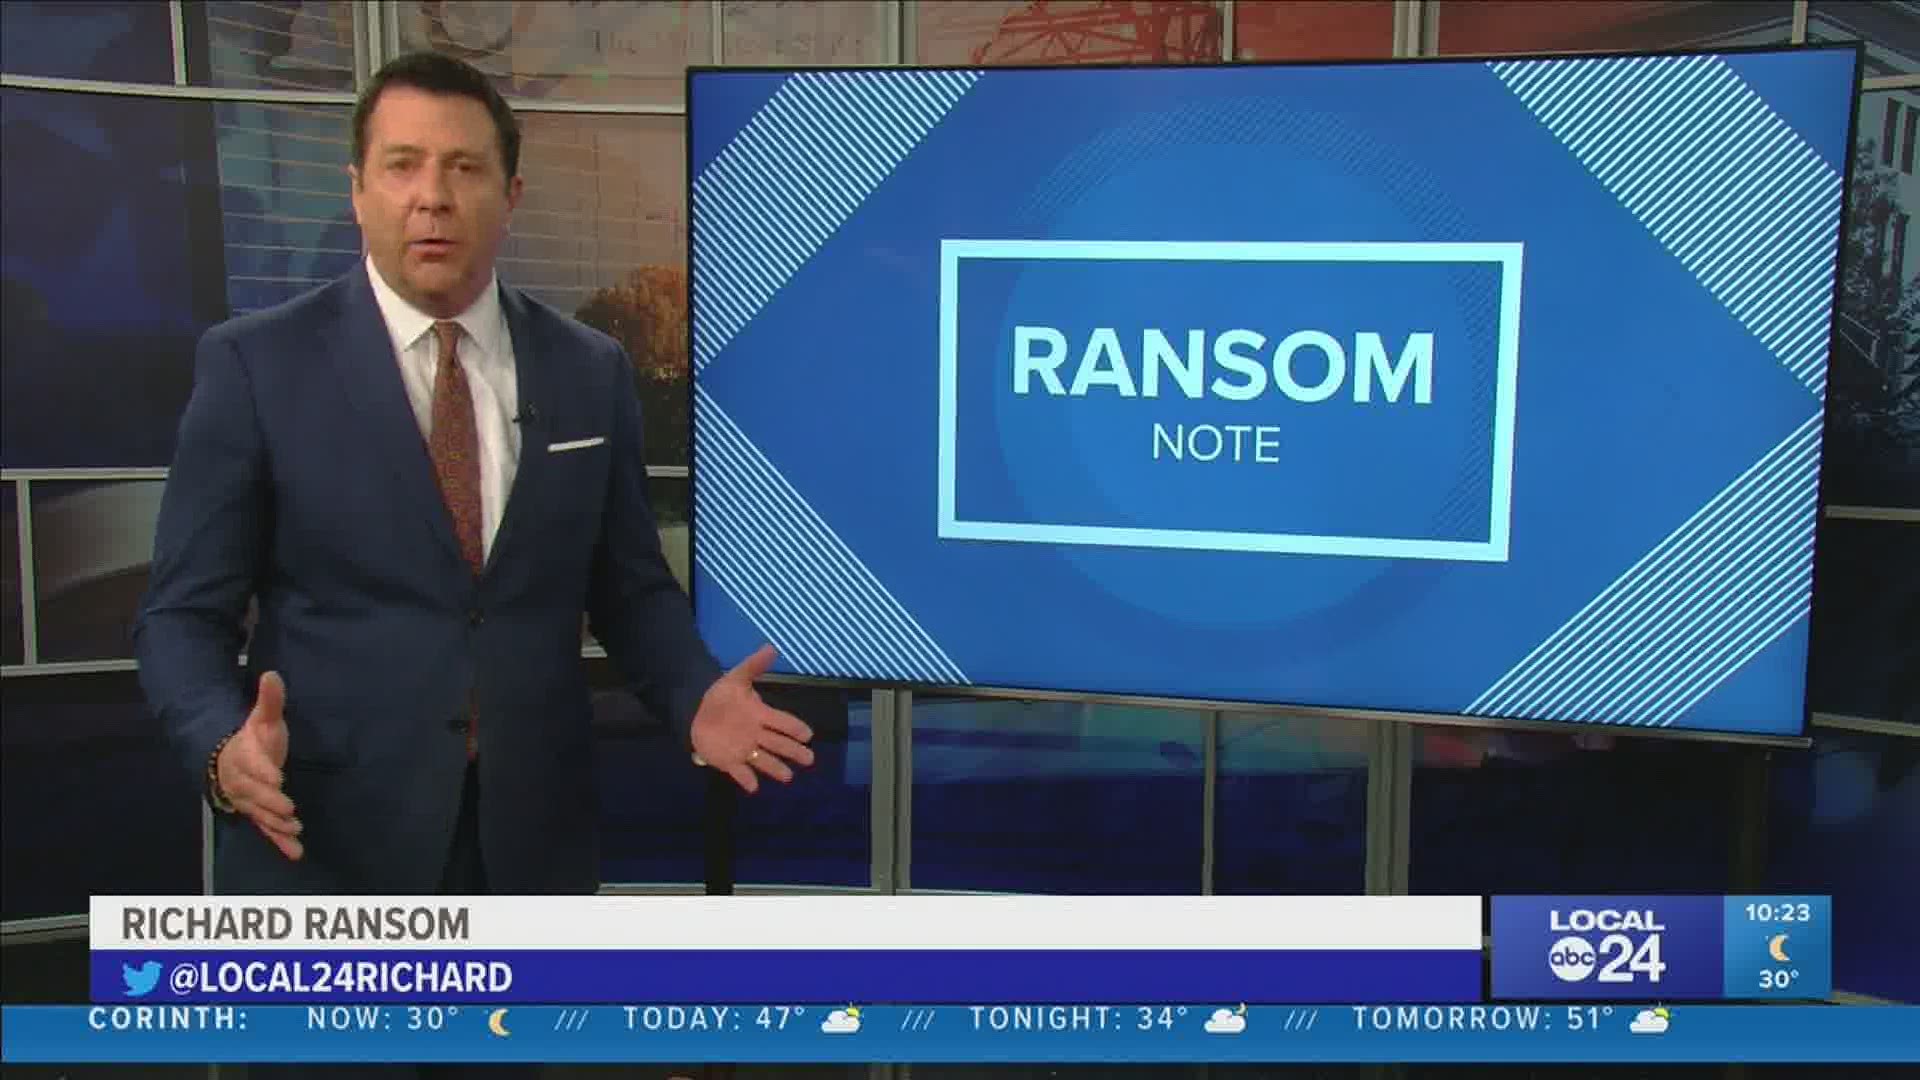 Local 24 News Anchor Richard Ransom discusses in his Ransom Note about how the lack of guidance from the government is making things overly complicated.